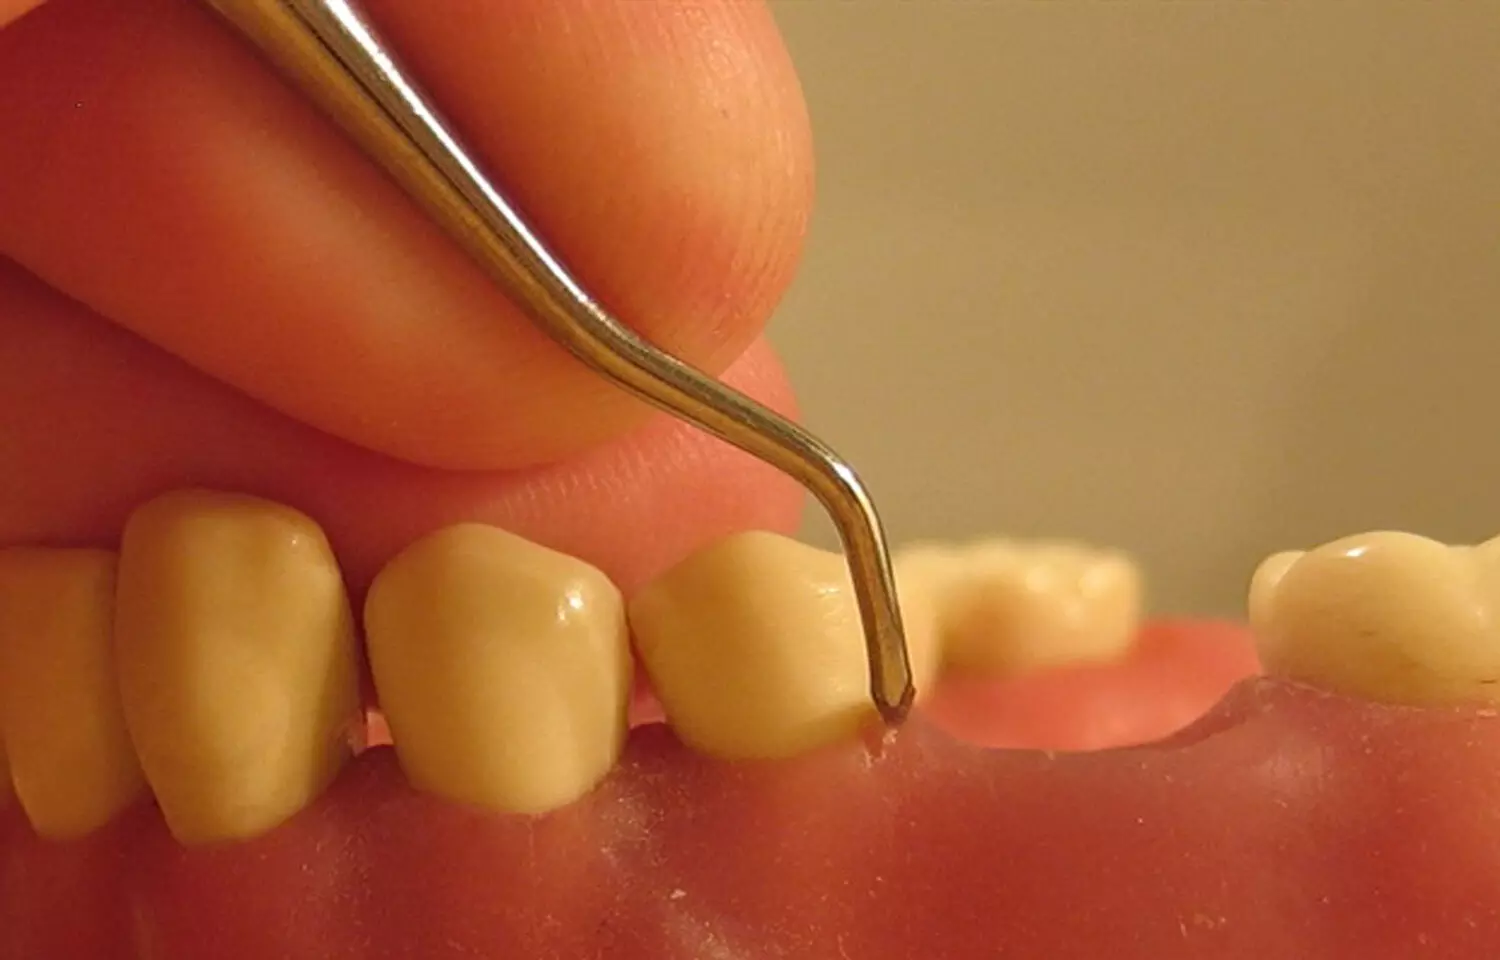 Patients may experience tooth loss during supportive periodontal therapy, Study says